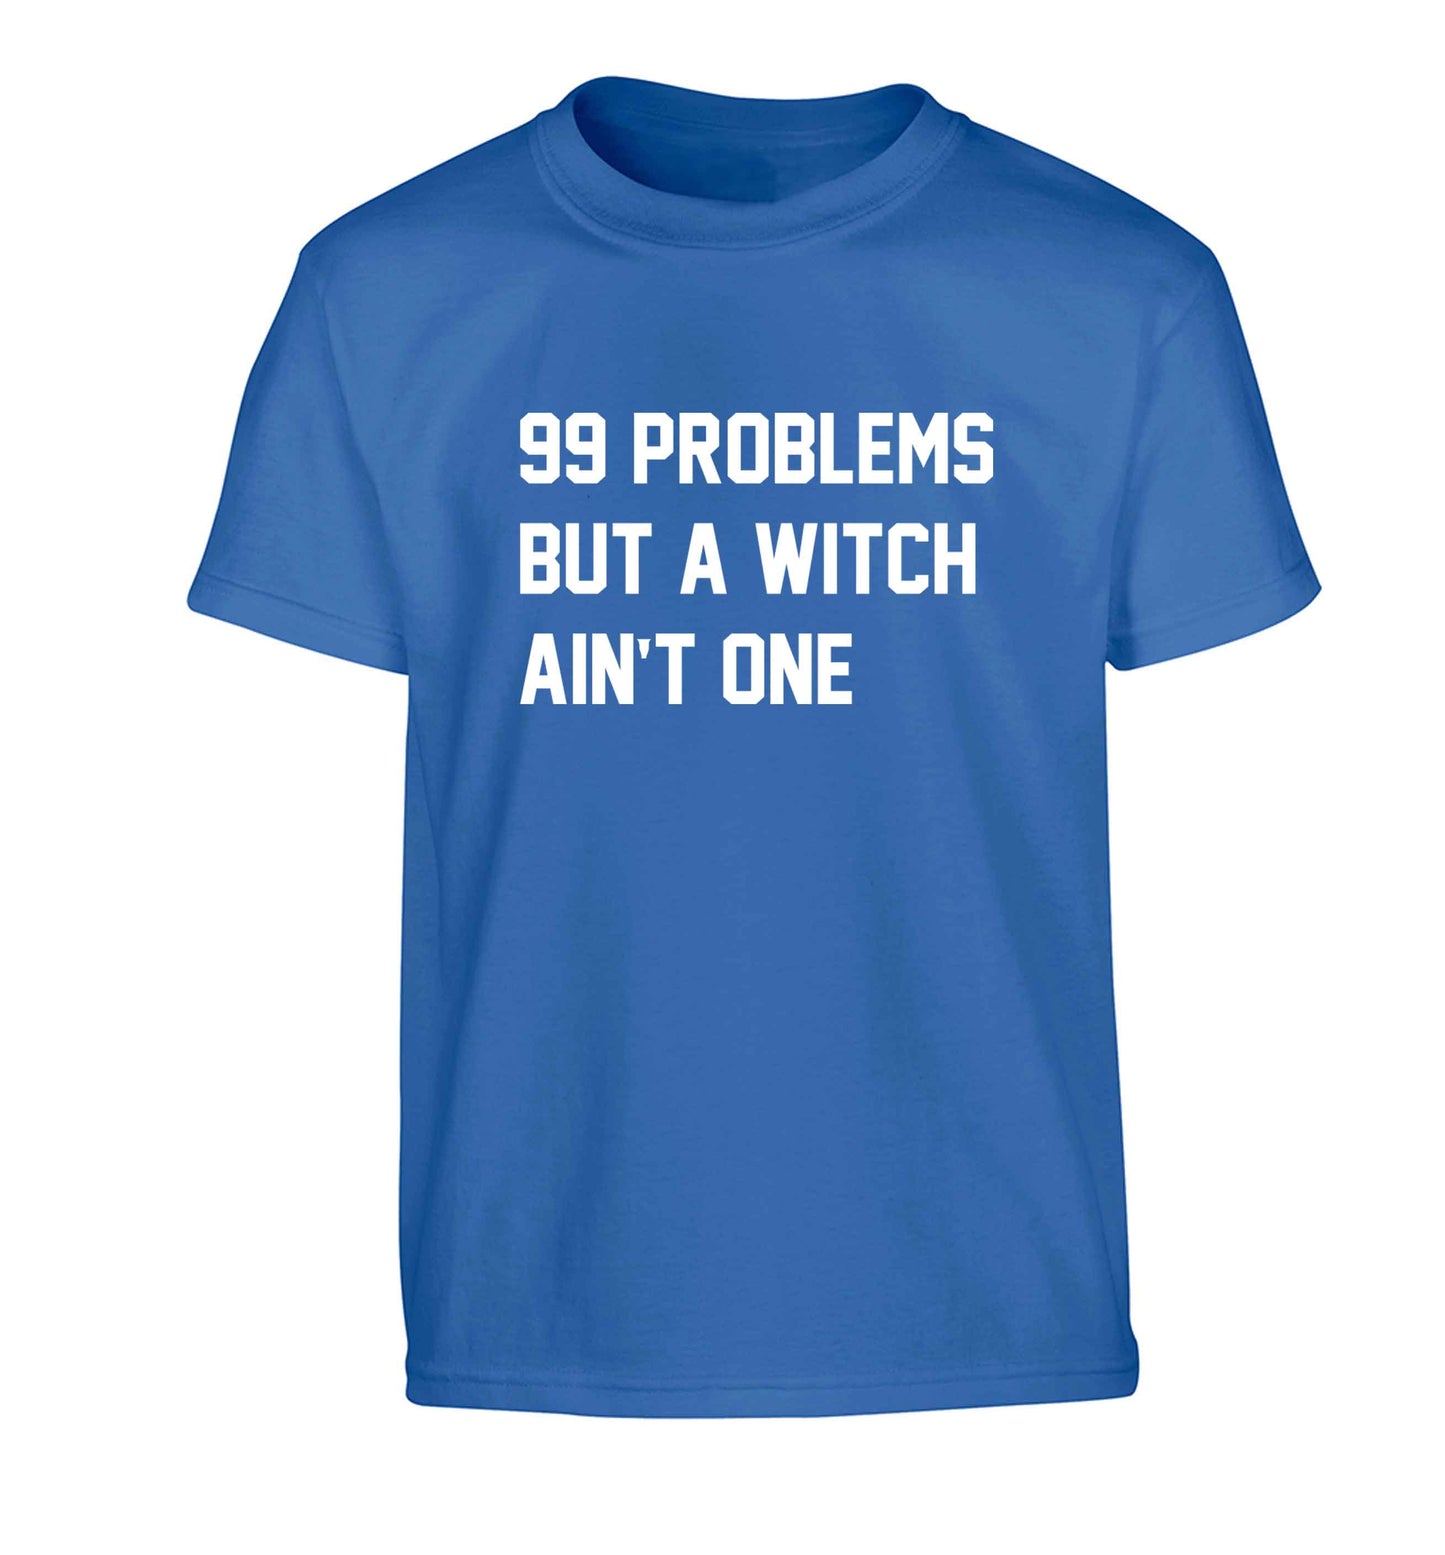 99 Problems but a witch aint one Children's blue Tshirt 12-13 Years